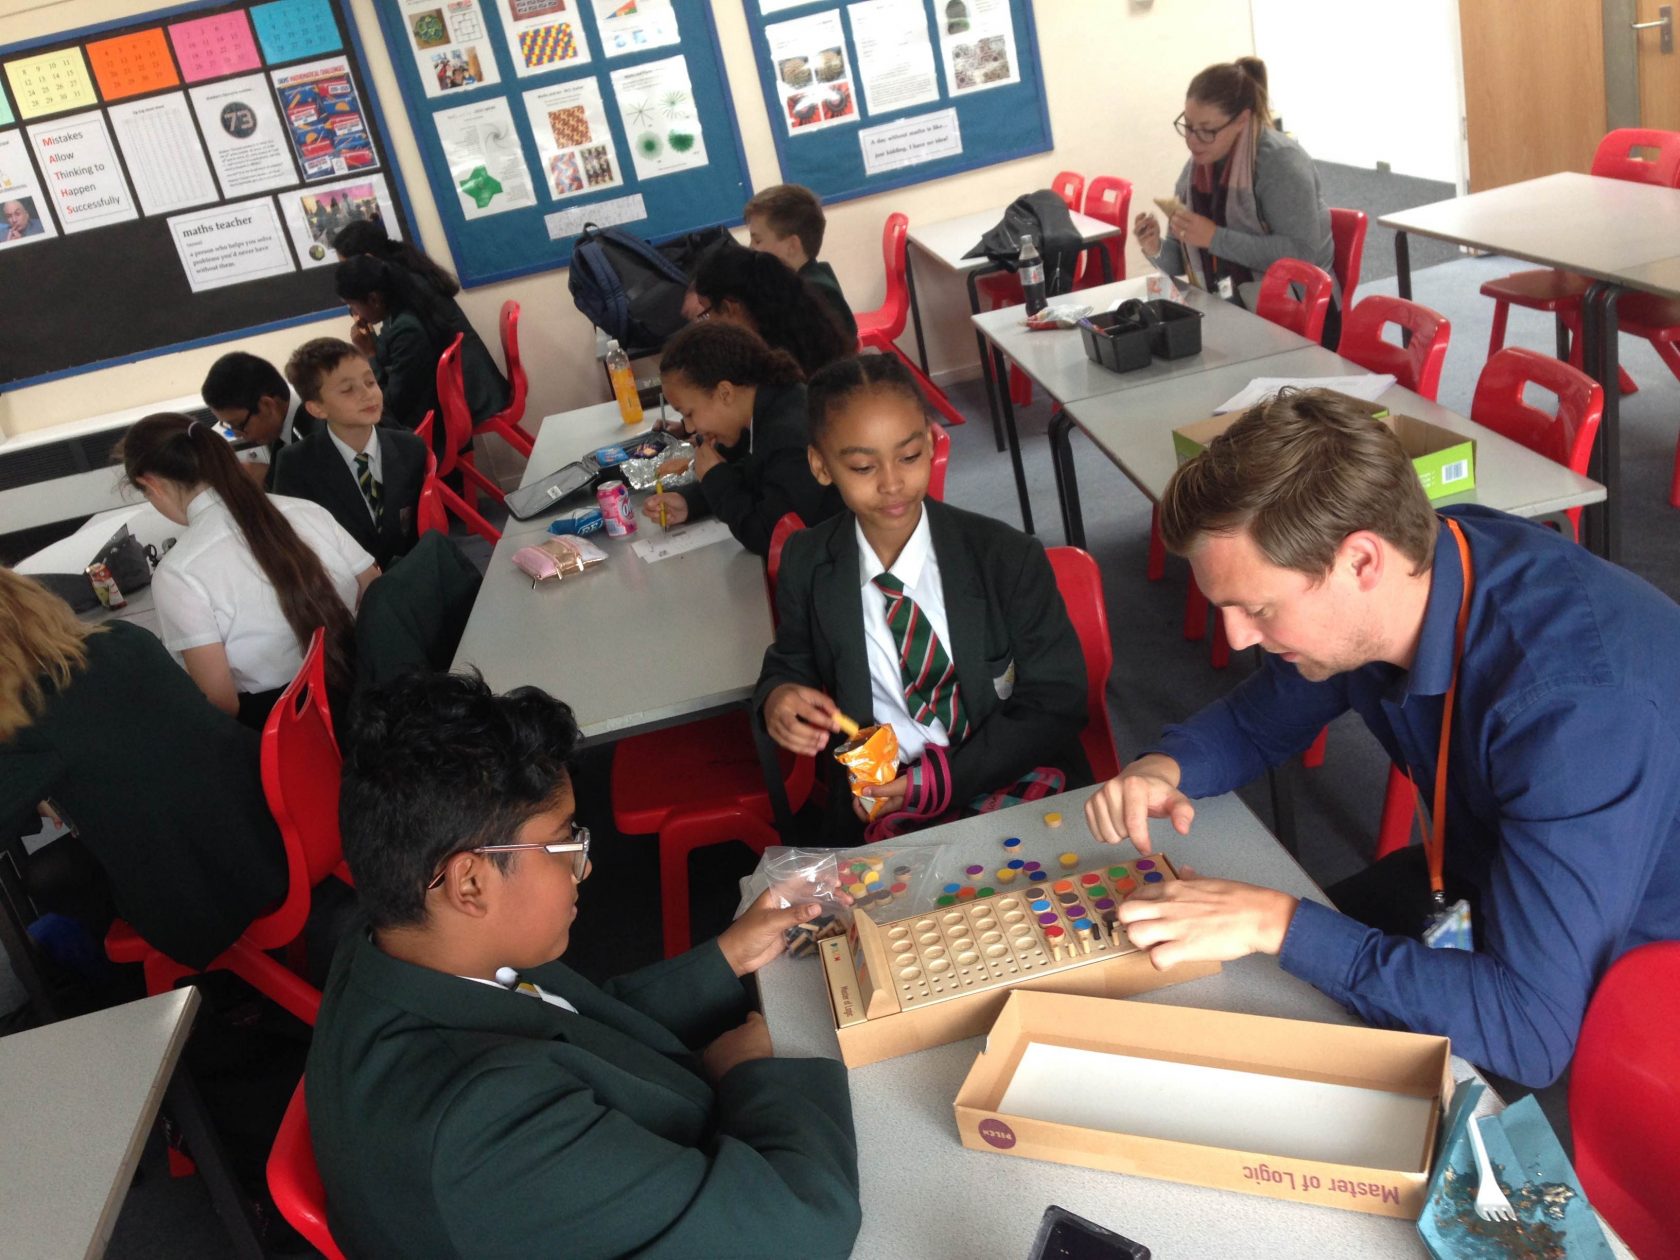 Maths Games Club has its first ‘guest appearance’ of the year